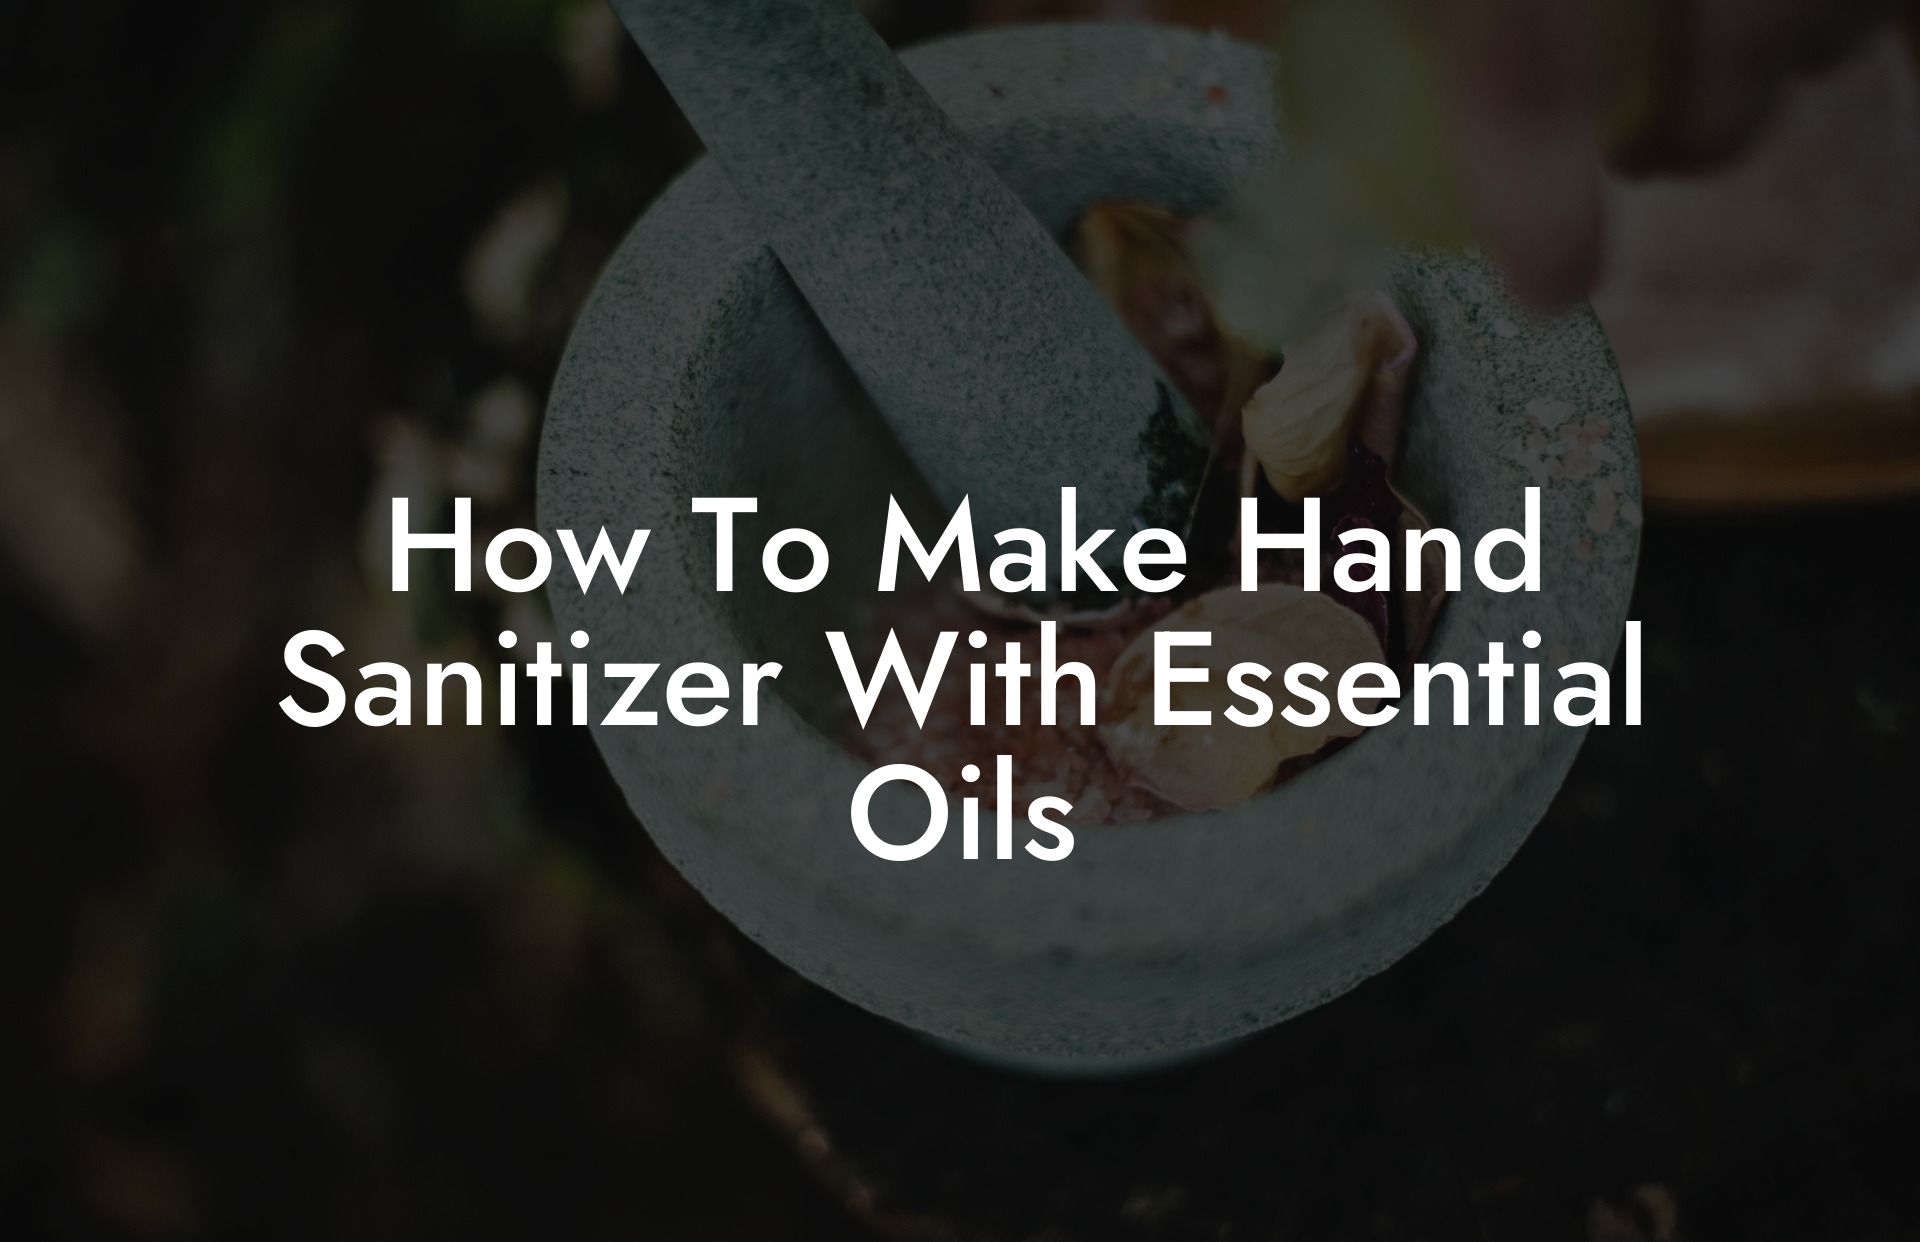 How To Make Hand Sanitizer With Essential Oils